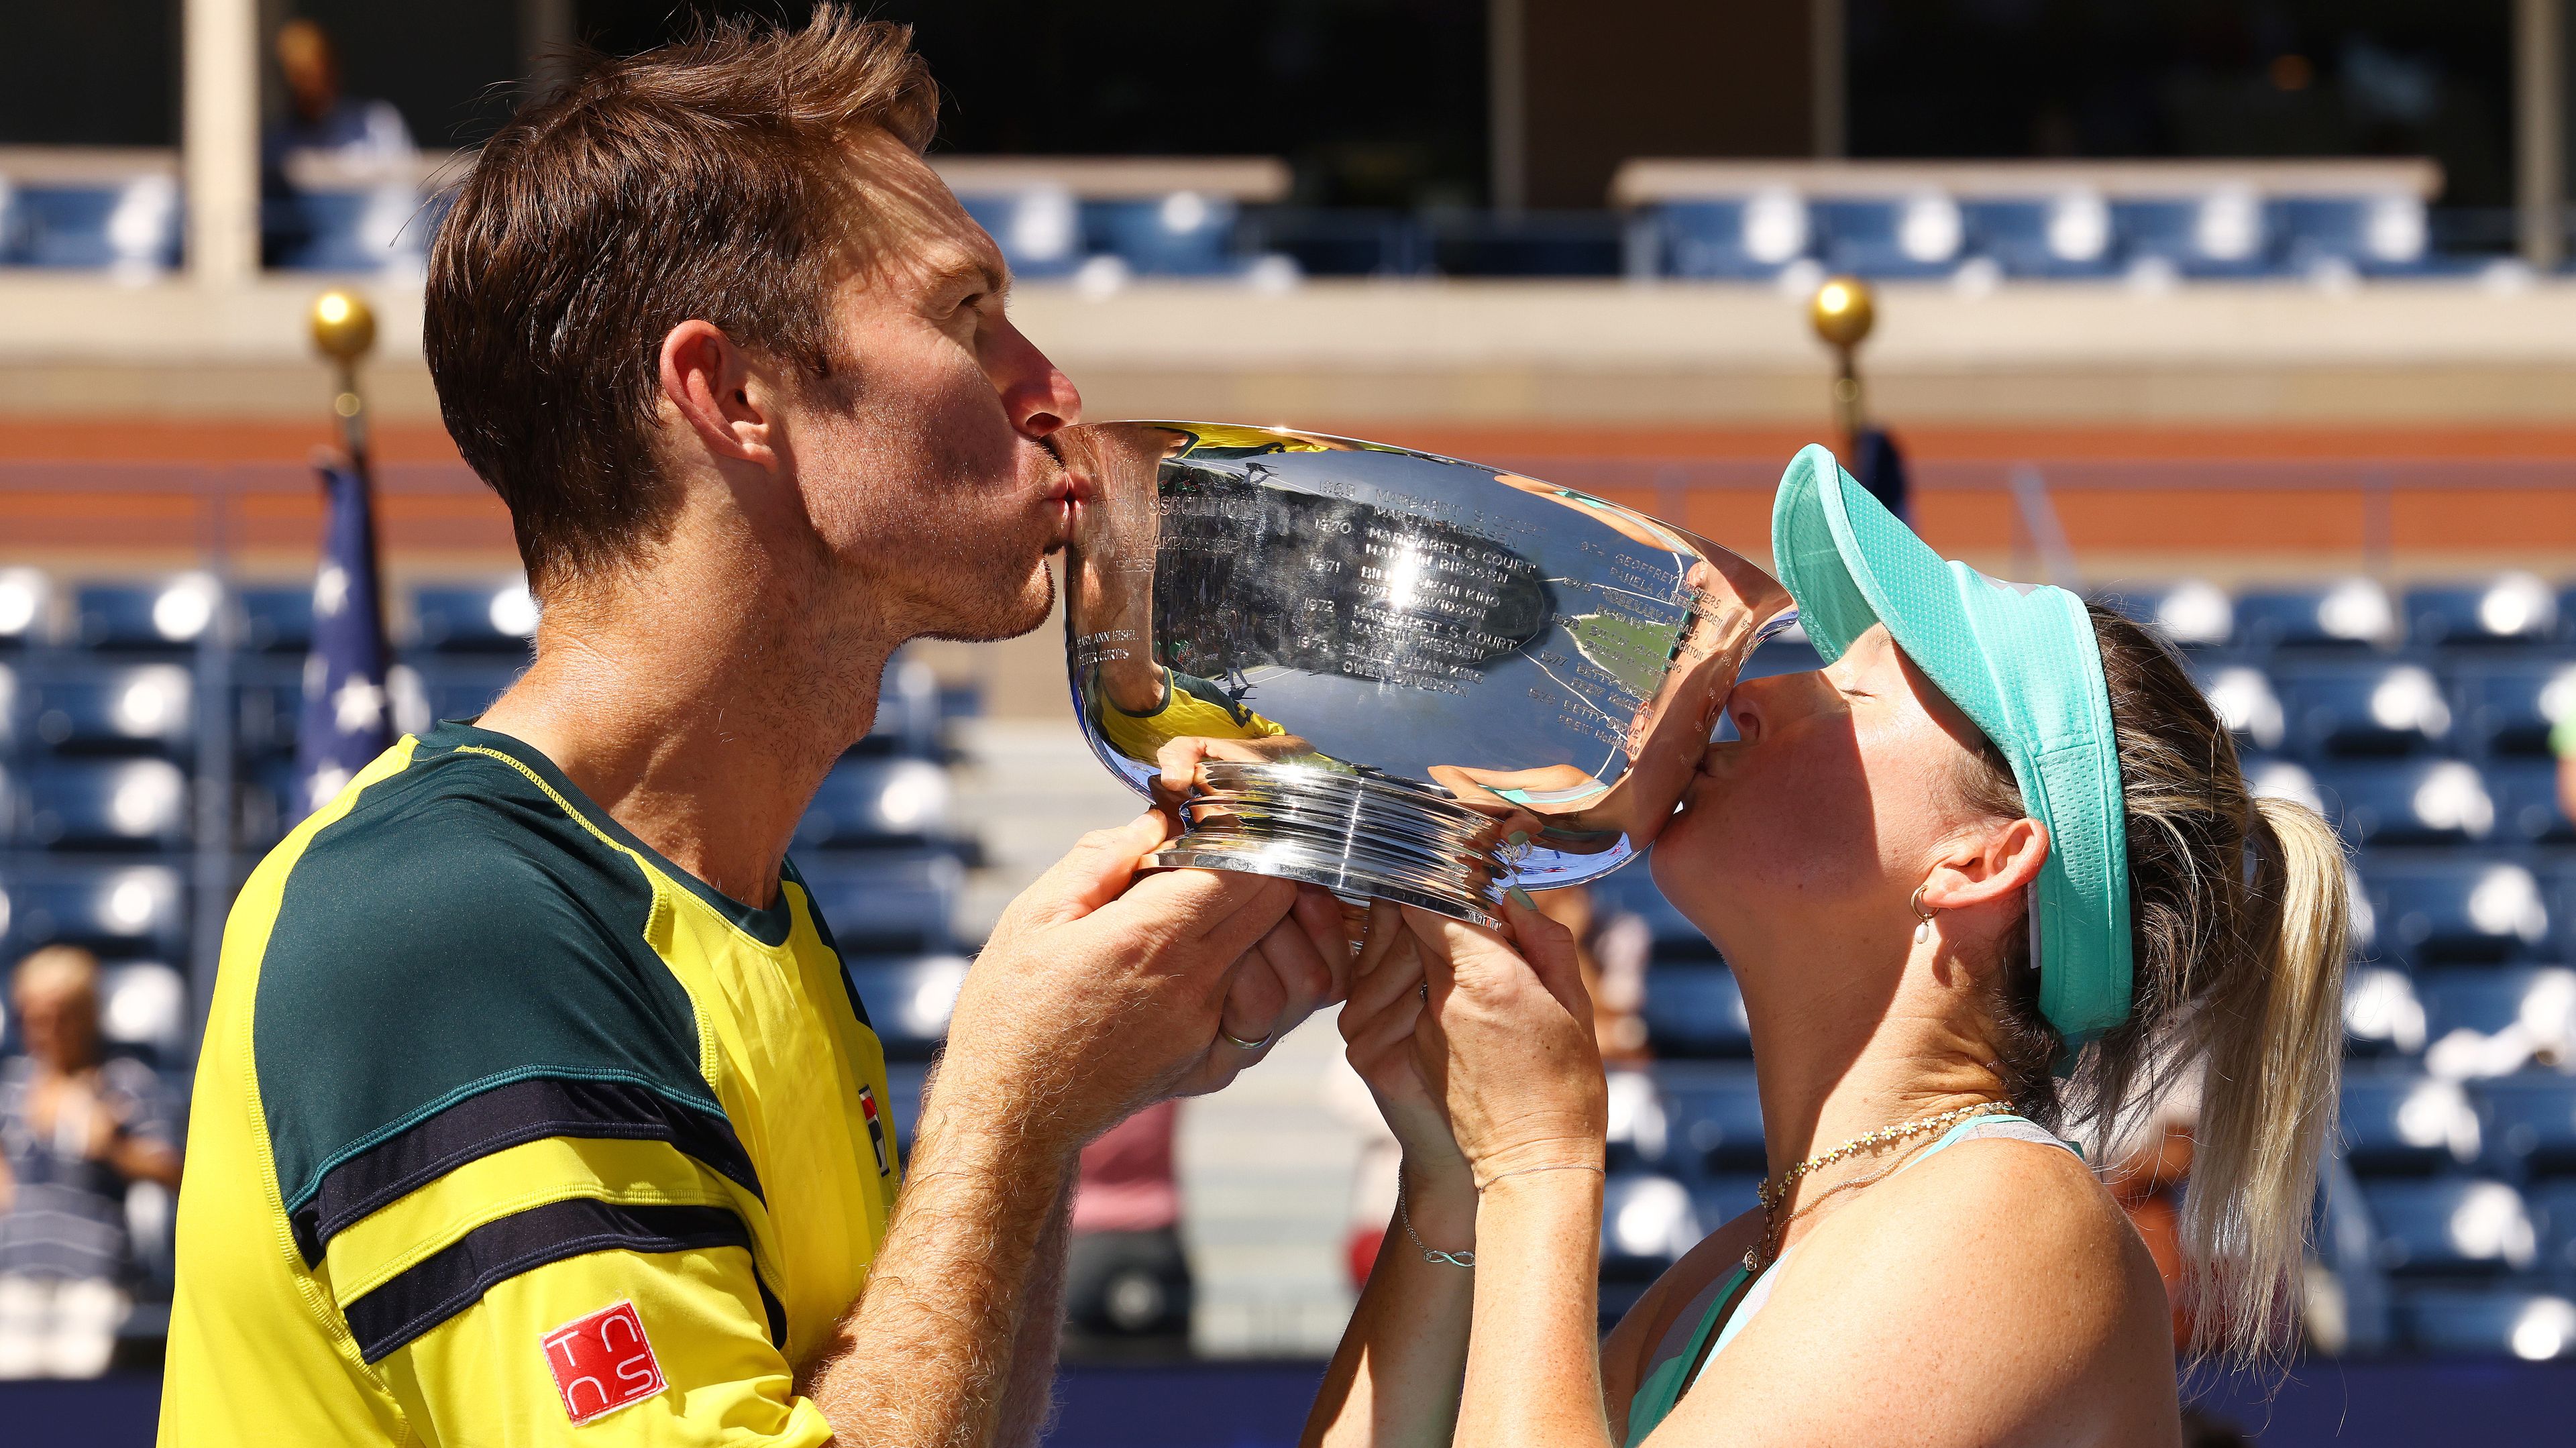 Storm Sanders (R) of Australia and John Peers (L) of Australia celebrate with the championship trophy after defeating Kirsten Flipkens of Belgium and Edouard Roger-Vasselin of France during their Mixed Doubles Final match on Day Thirteen of the 2022 US Open at USTA Billie Jean King National Tennis Center on September 10, 2022 in the Flushing neighborhood of the Queens borough of New York City. (Photo by Mike Stobe/Getty Images)